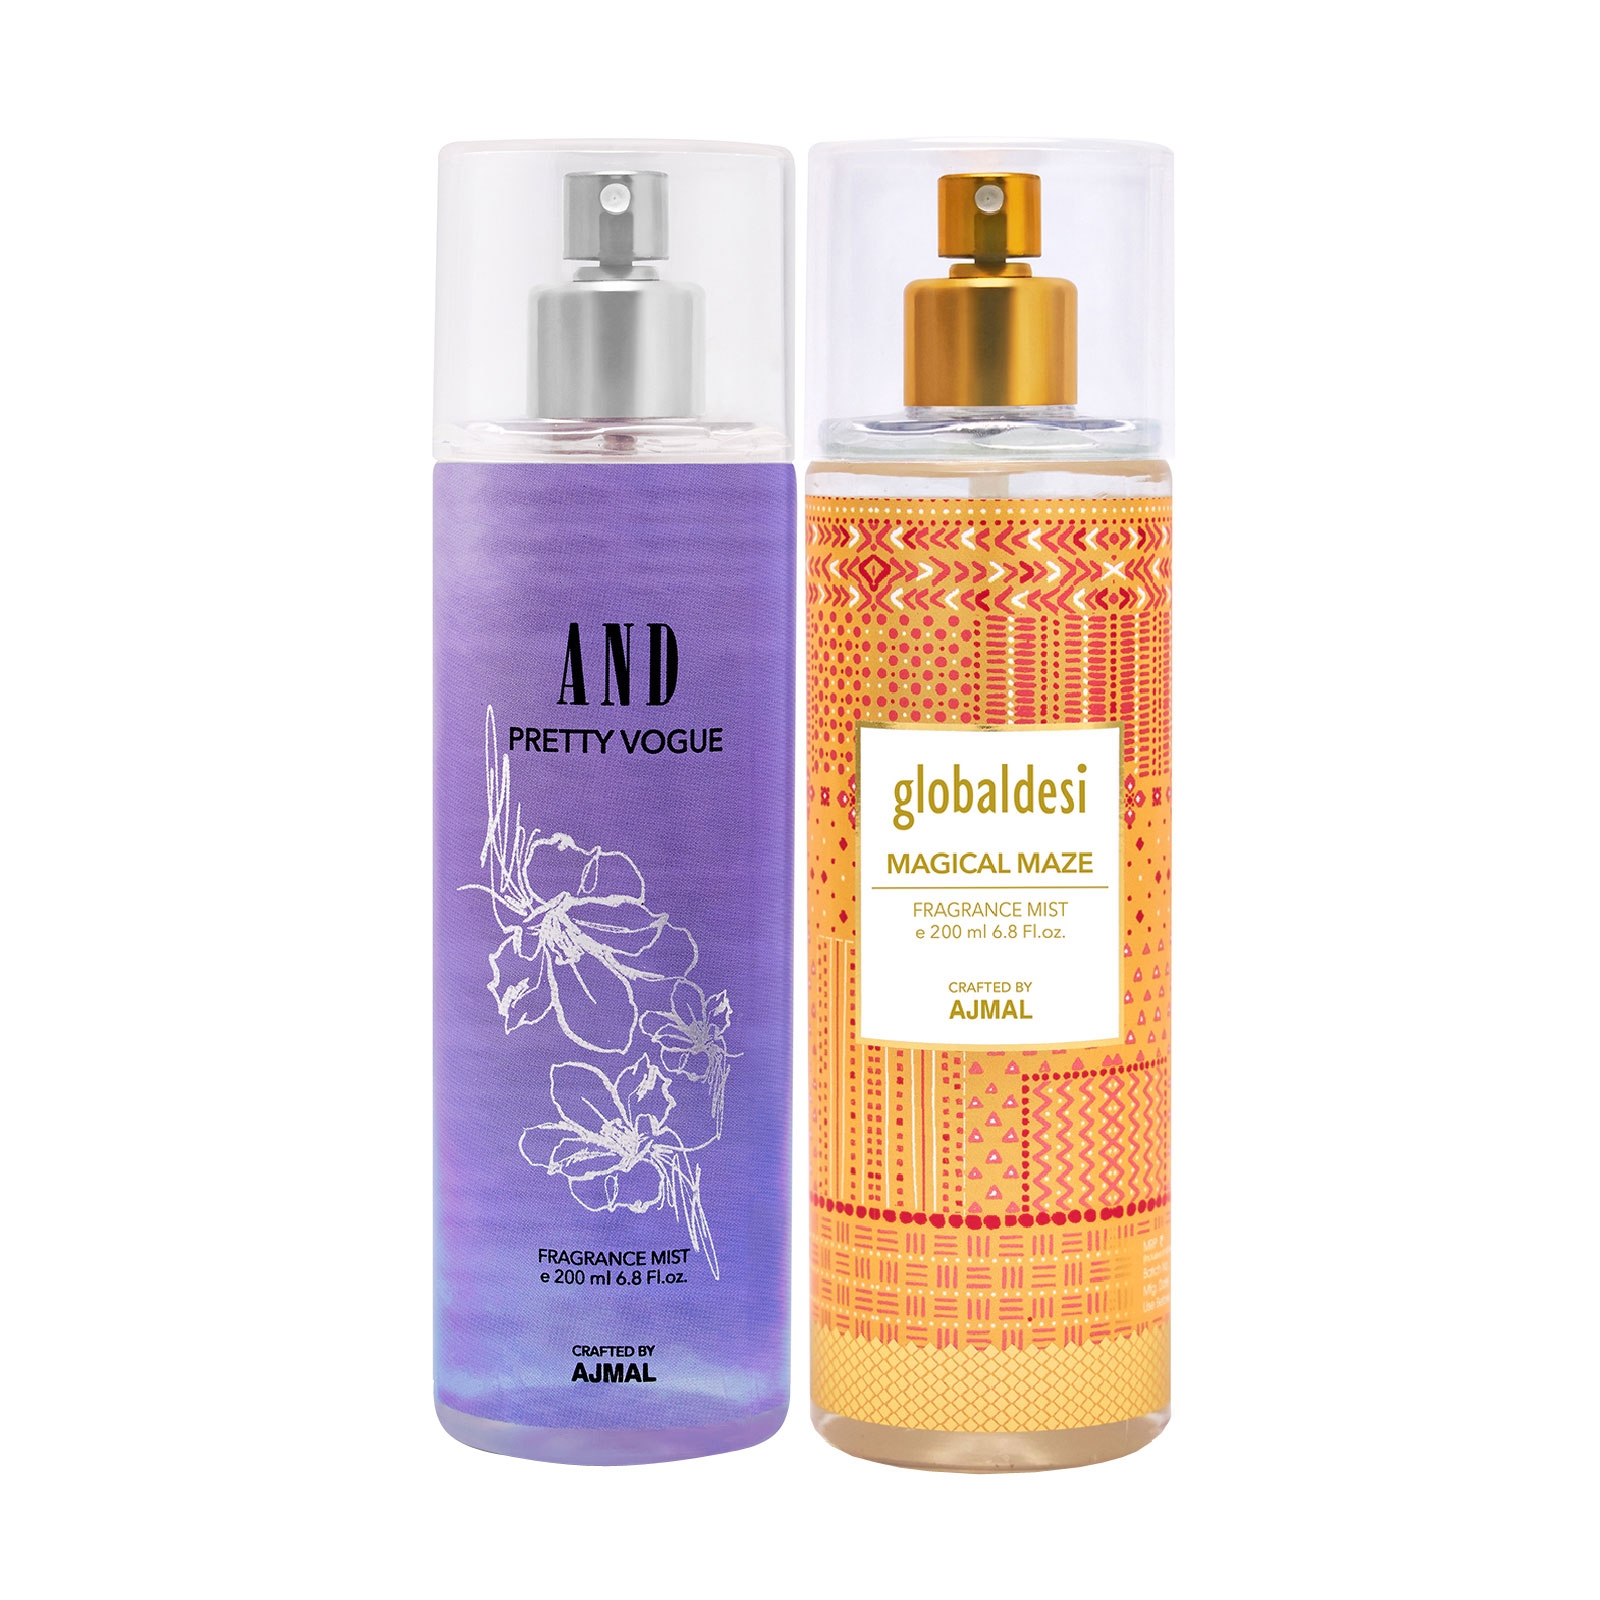 AND Crafted By Ajmal | AND Pretty Vogue Body Mist 200ML & Global Desi Magical Maze Body Mist 200ML 